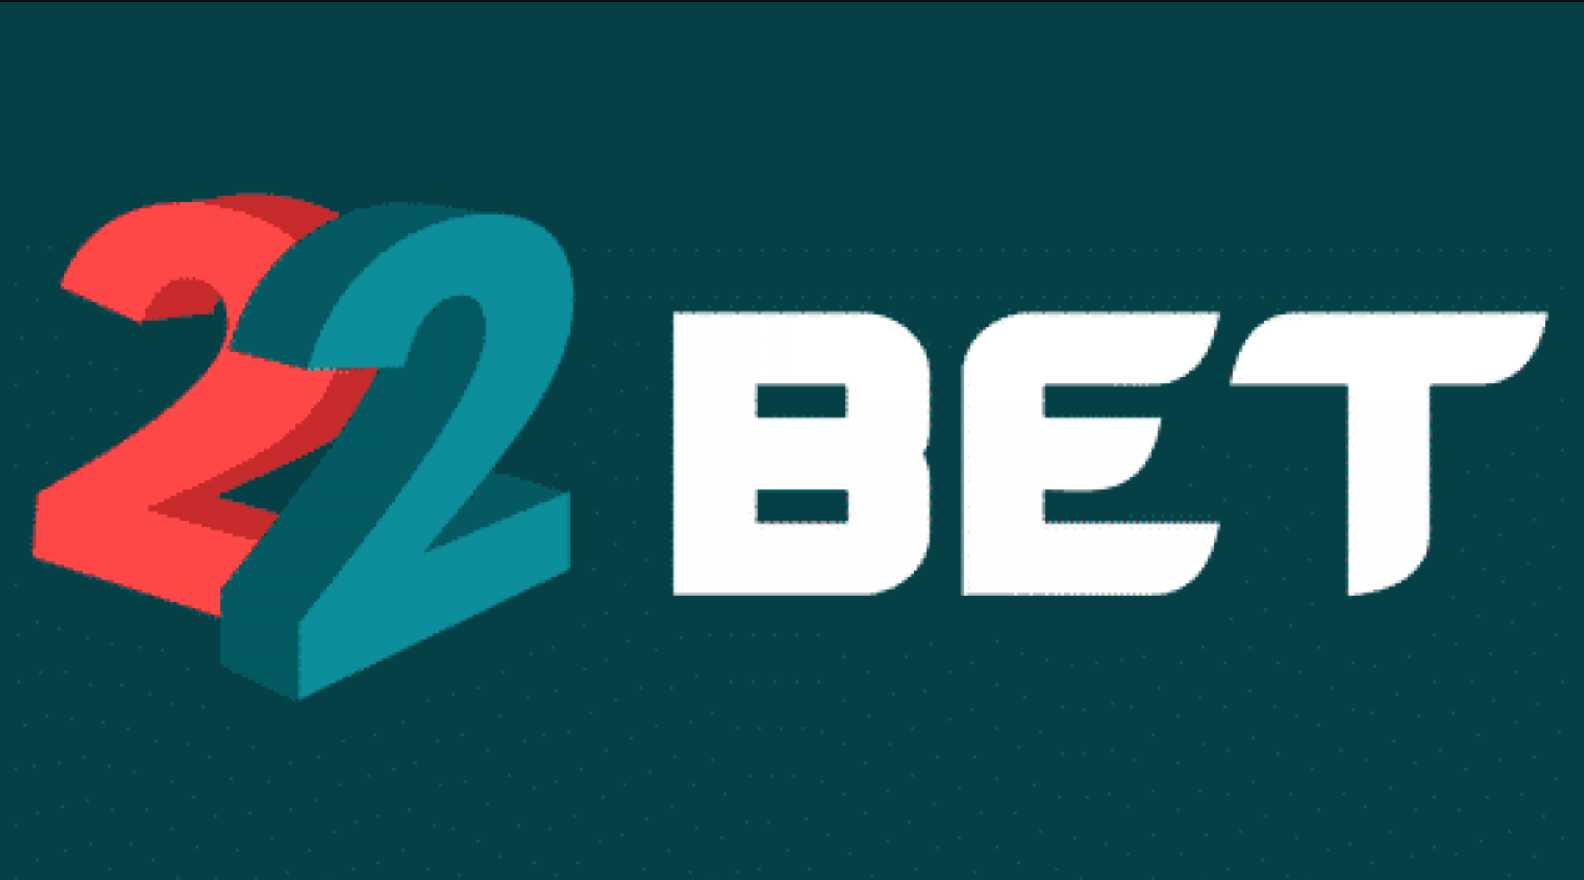 How to get the 22Bet promo code